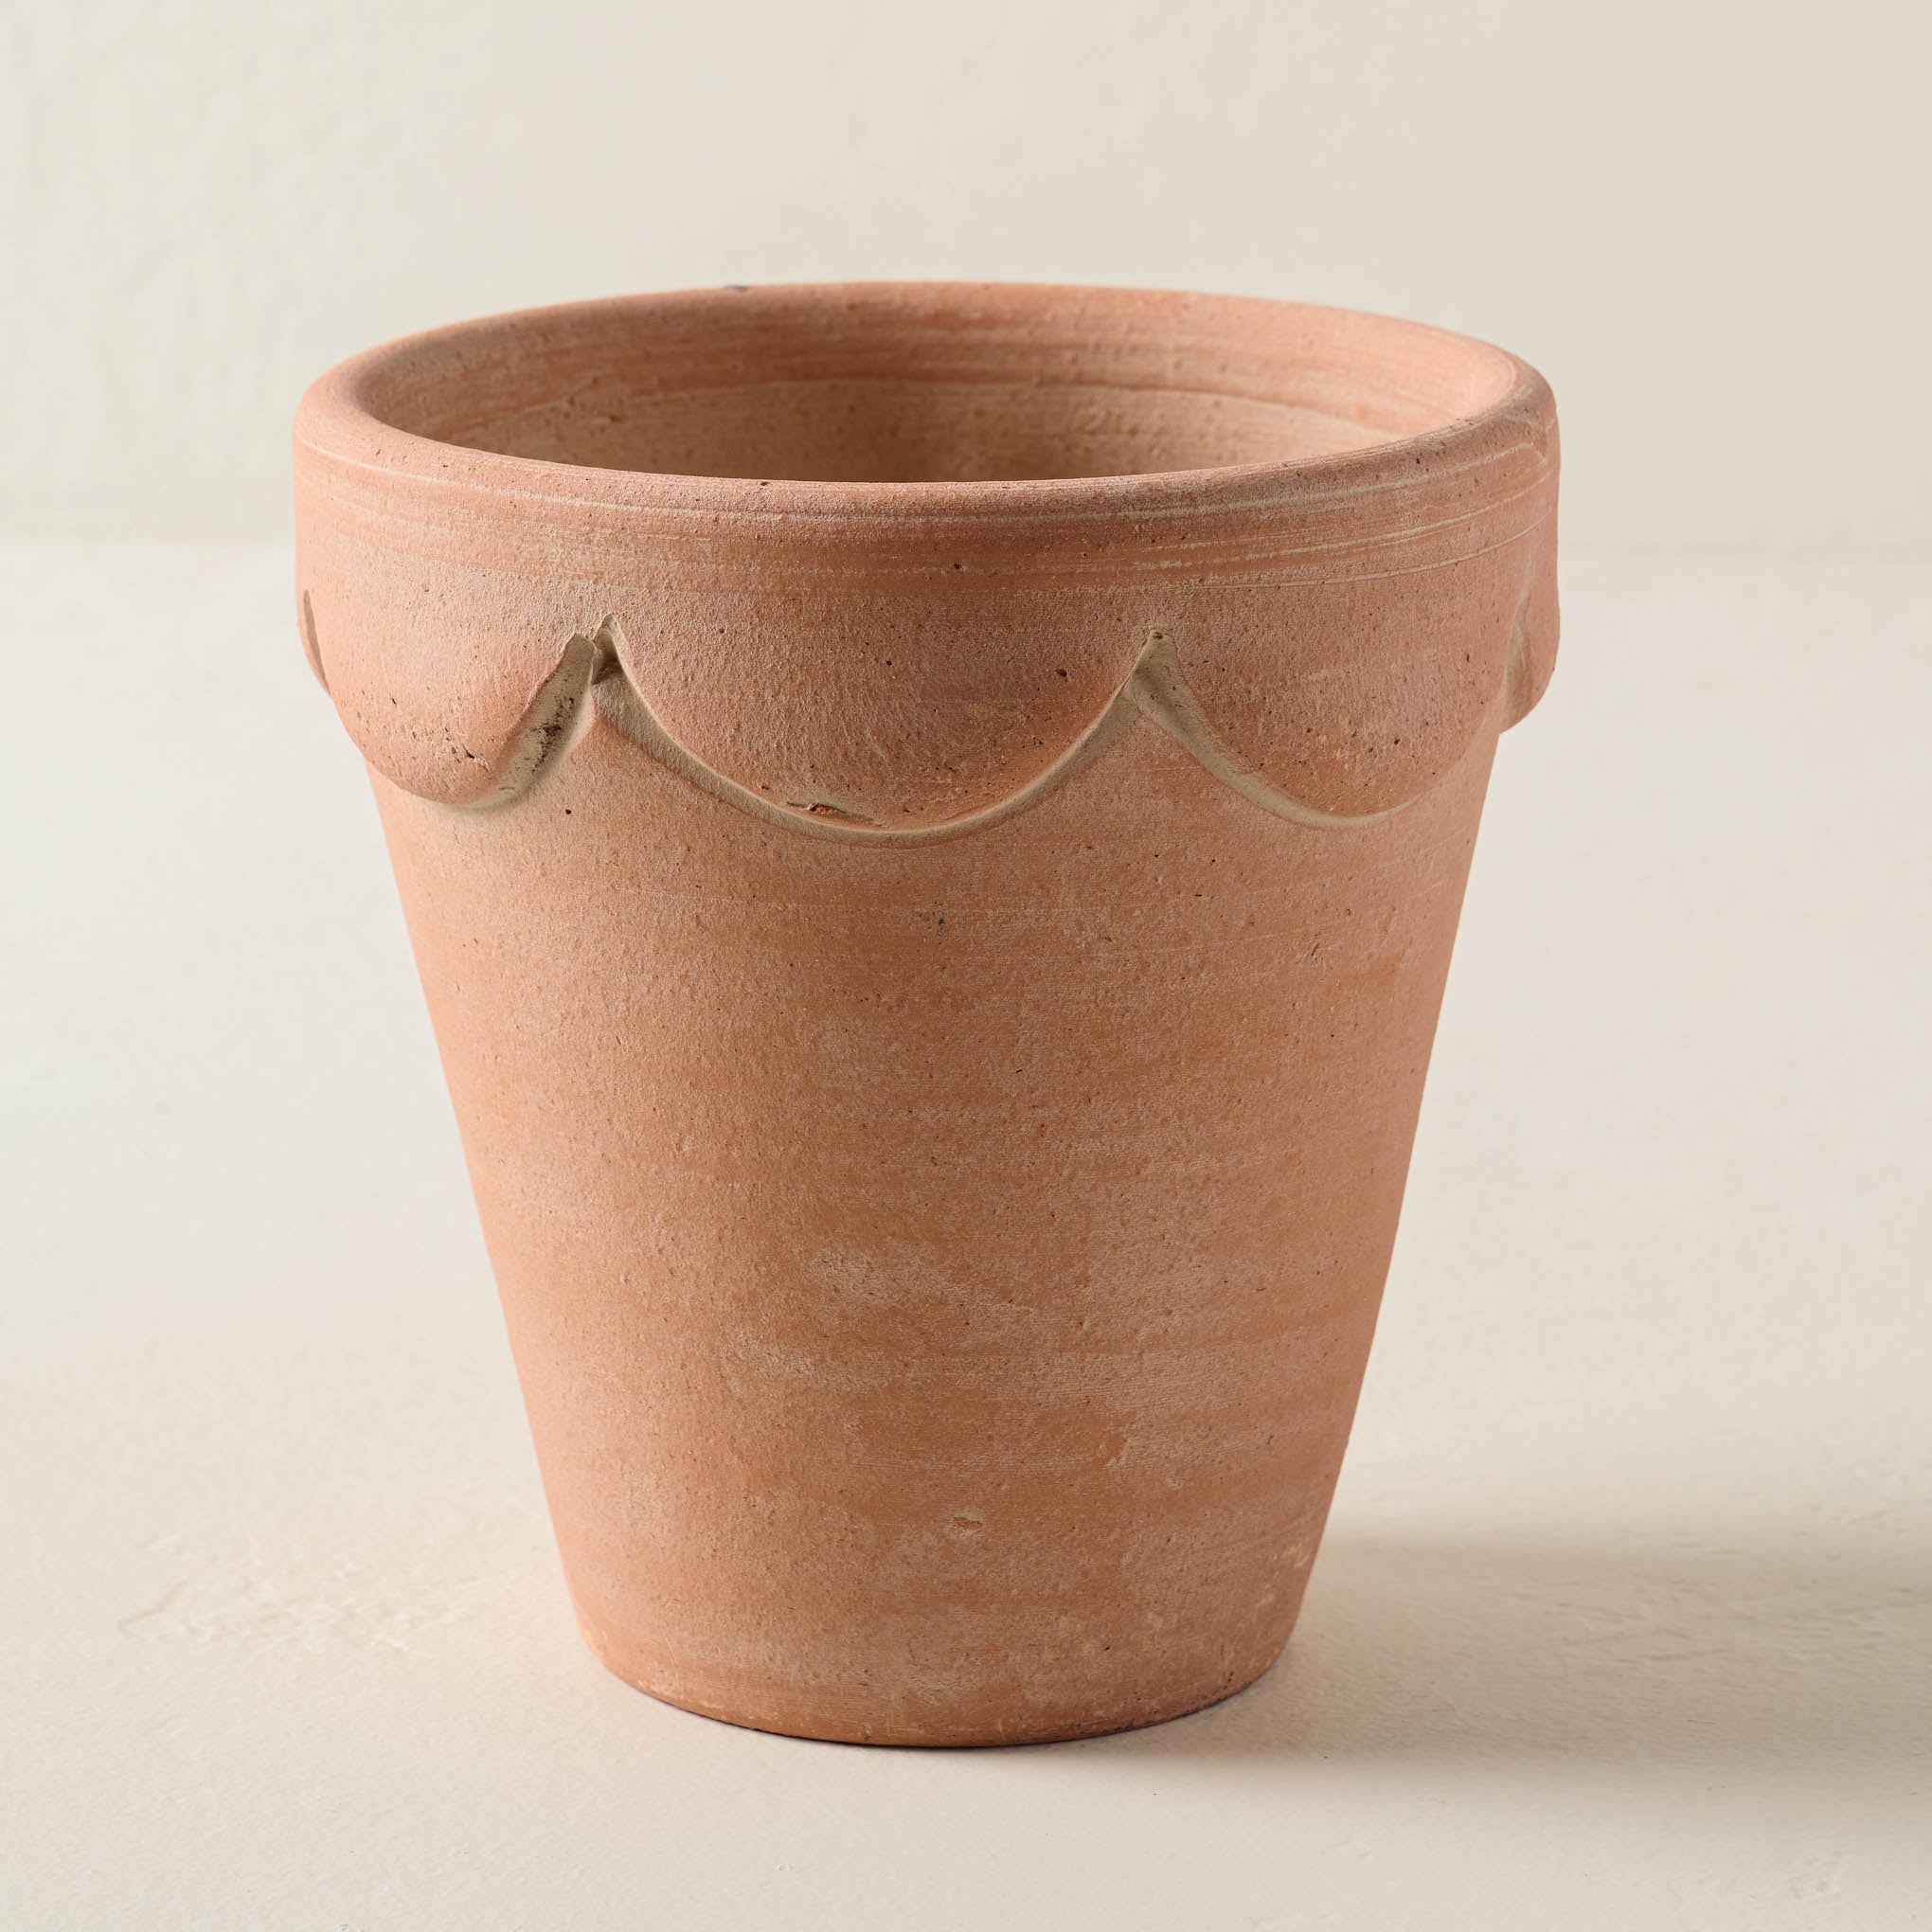 Terracotta Orleans Pot large  Items range from $36.00 to $46.00